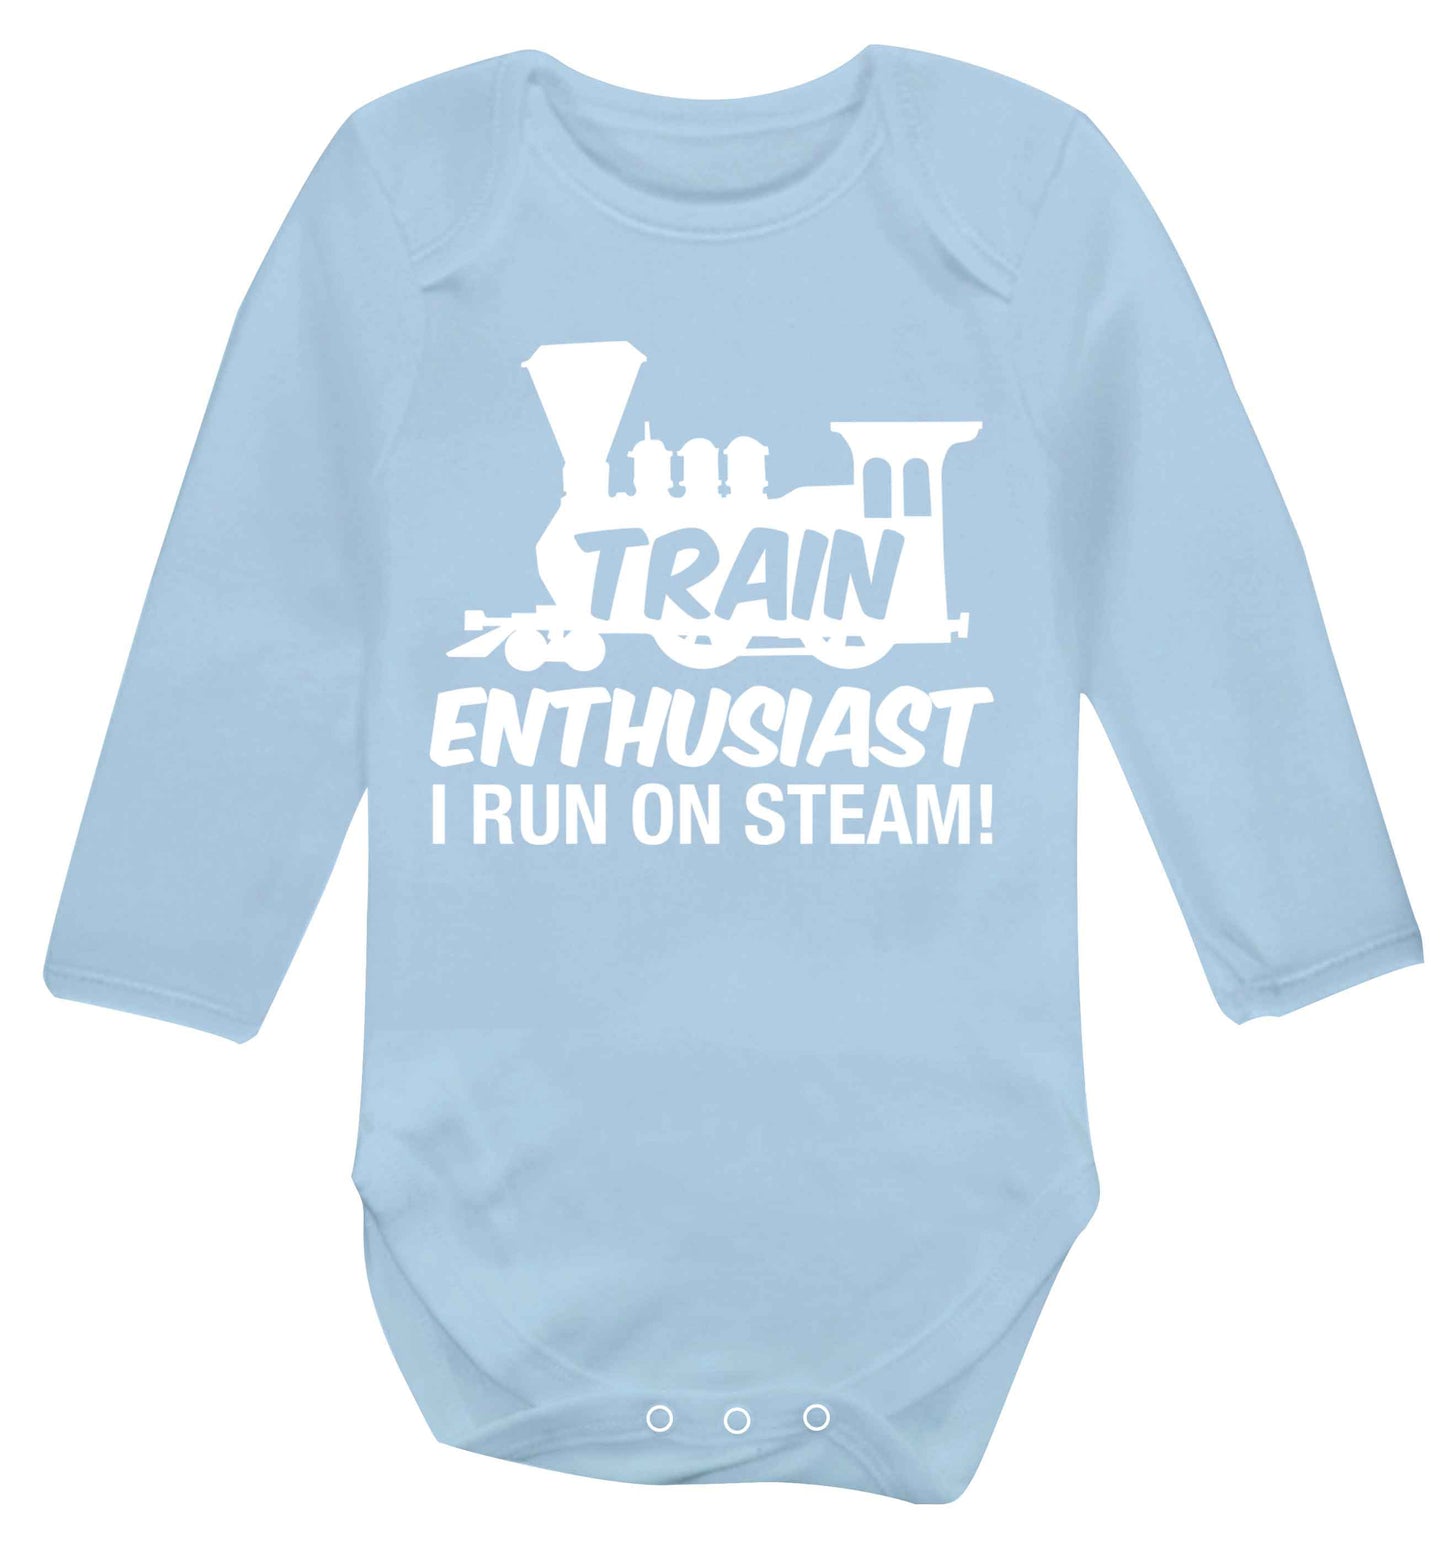 Train enthusiast I run on steam Baby Vest long sleeved pale blue 6-12 months